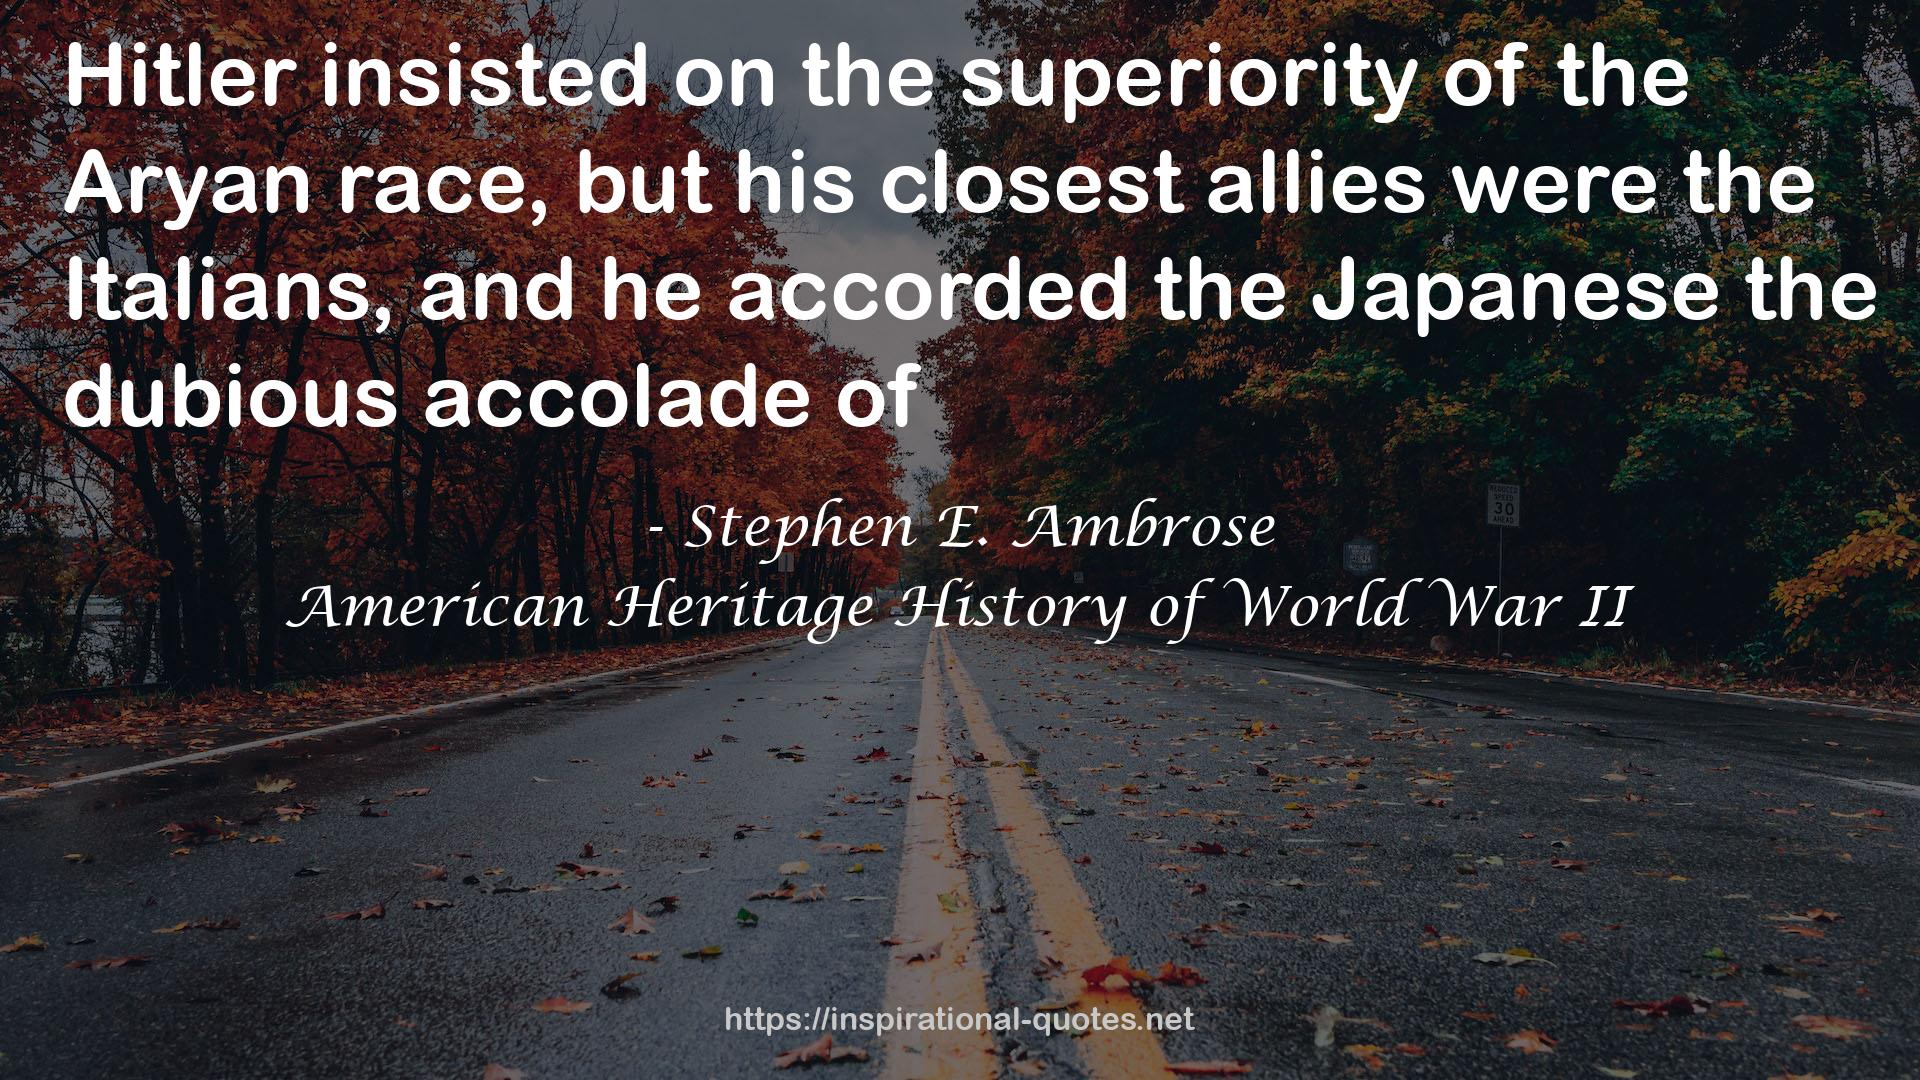 American Heritage History of World War II QUOTES